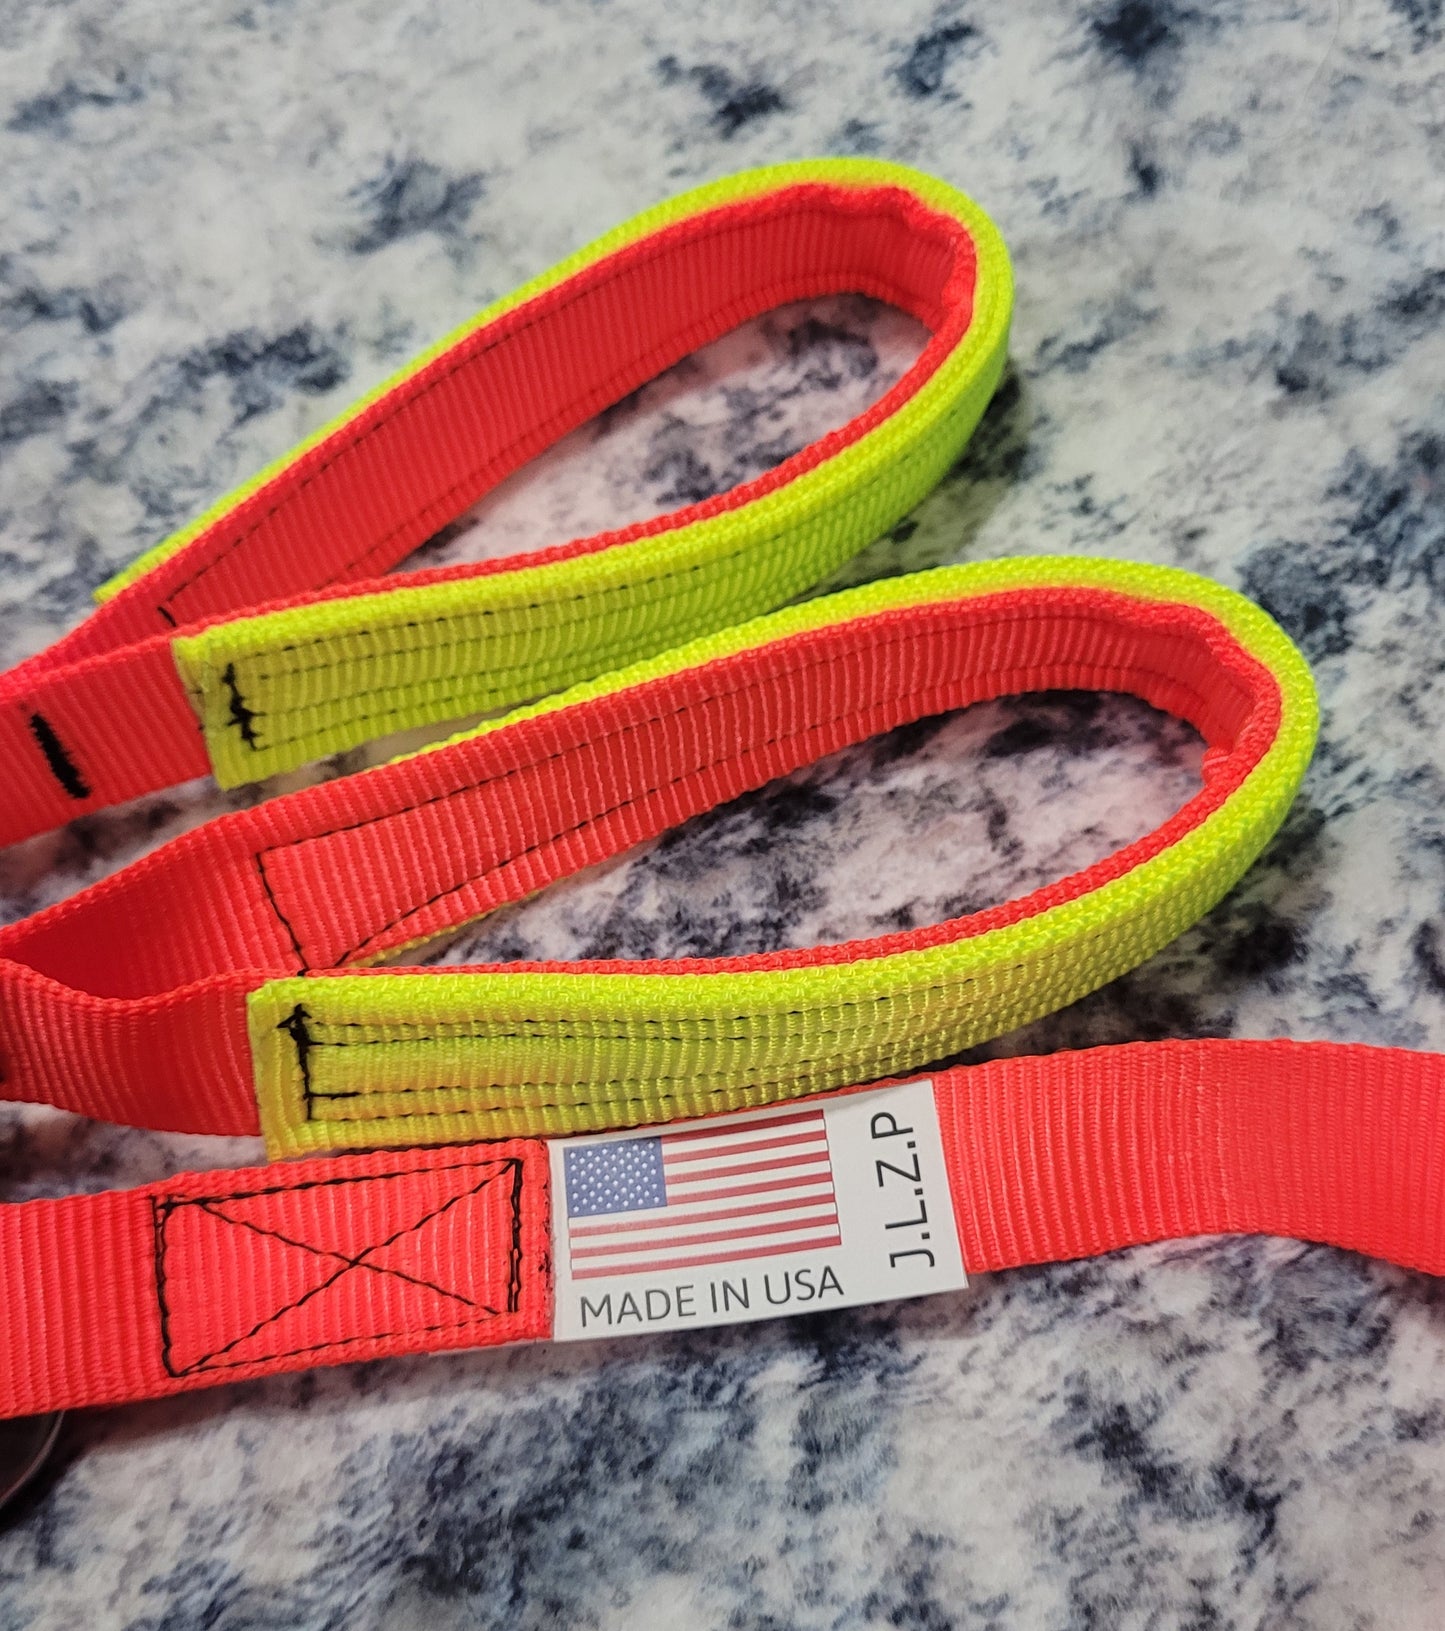 Hasty Rescue Strap (HRS)